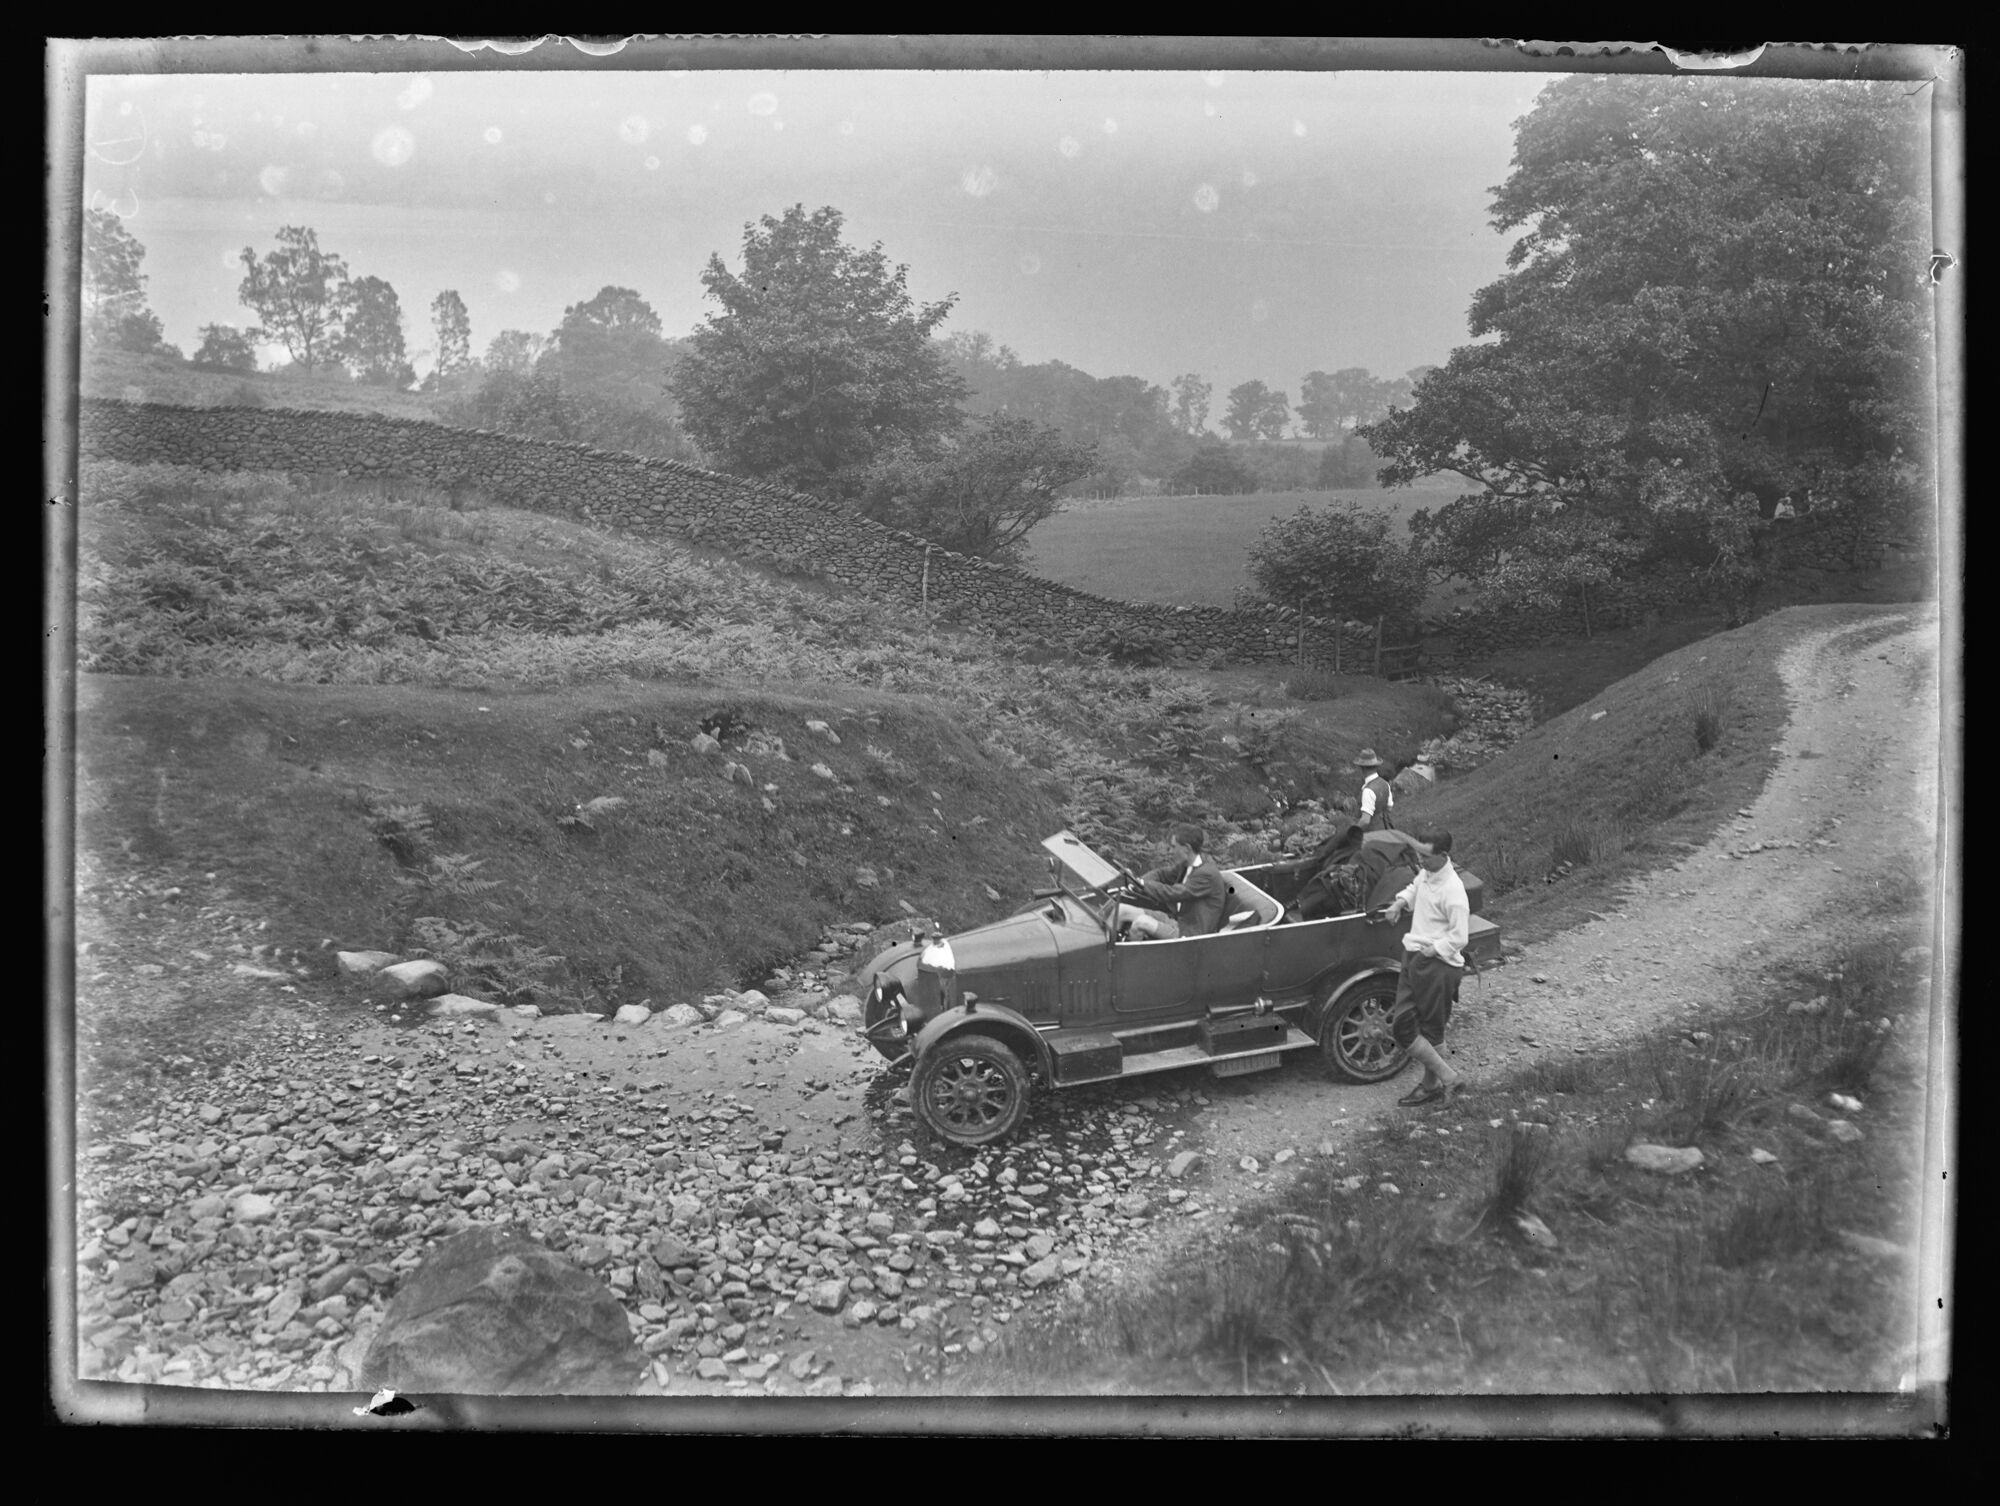 Car at a Ford, between Sandwick and Patterdale, near Ullswater